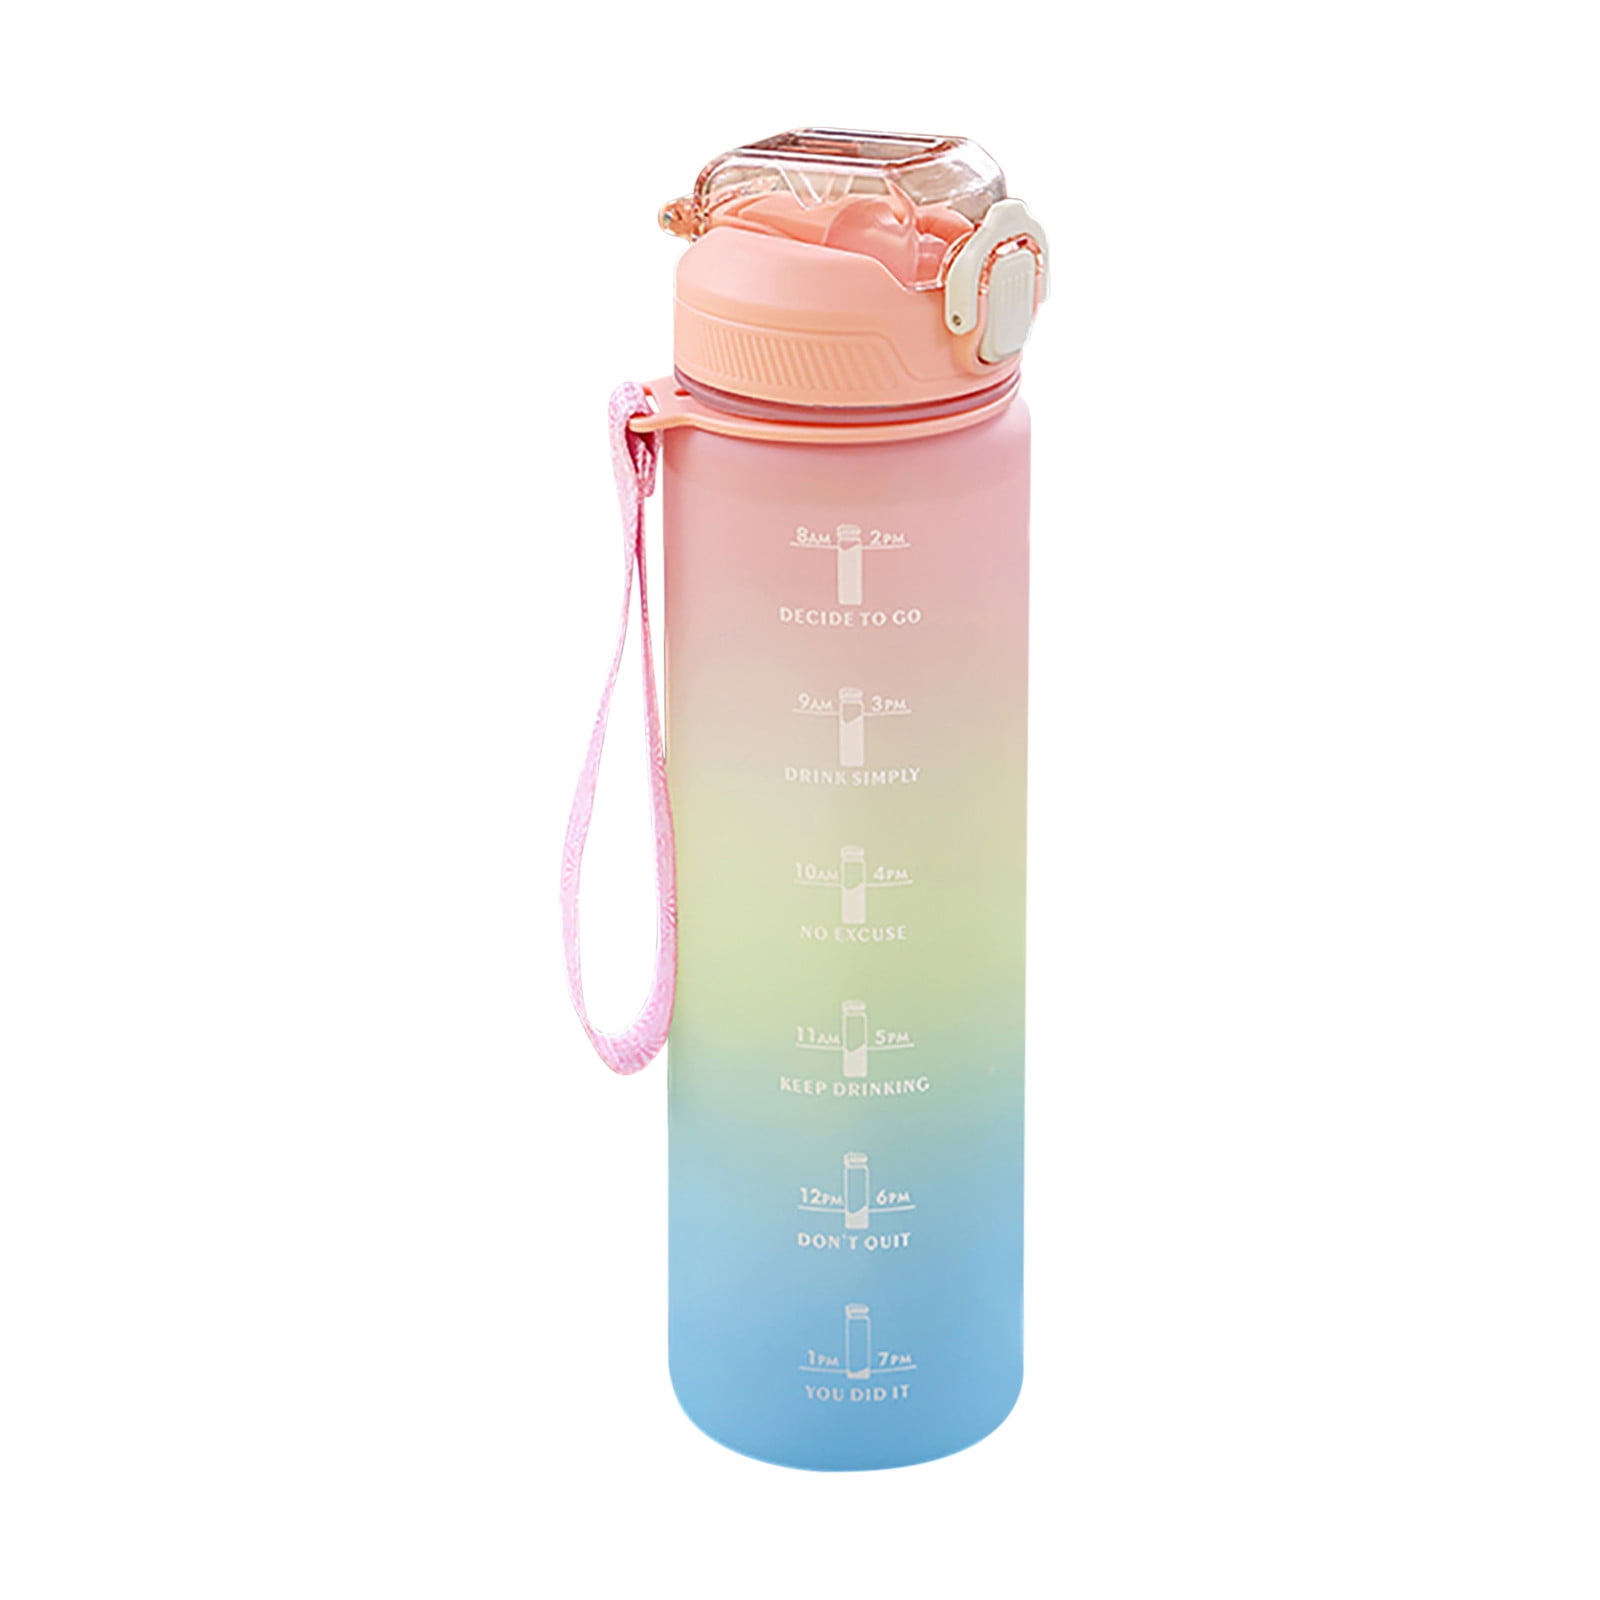 JUNZAN Water Bottles with Straw for Women 32 oz Timer Marker Palm Tropical  Water Bottle for Workout …See more JUNZAN Water Bottles with Straw for